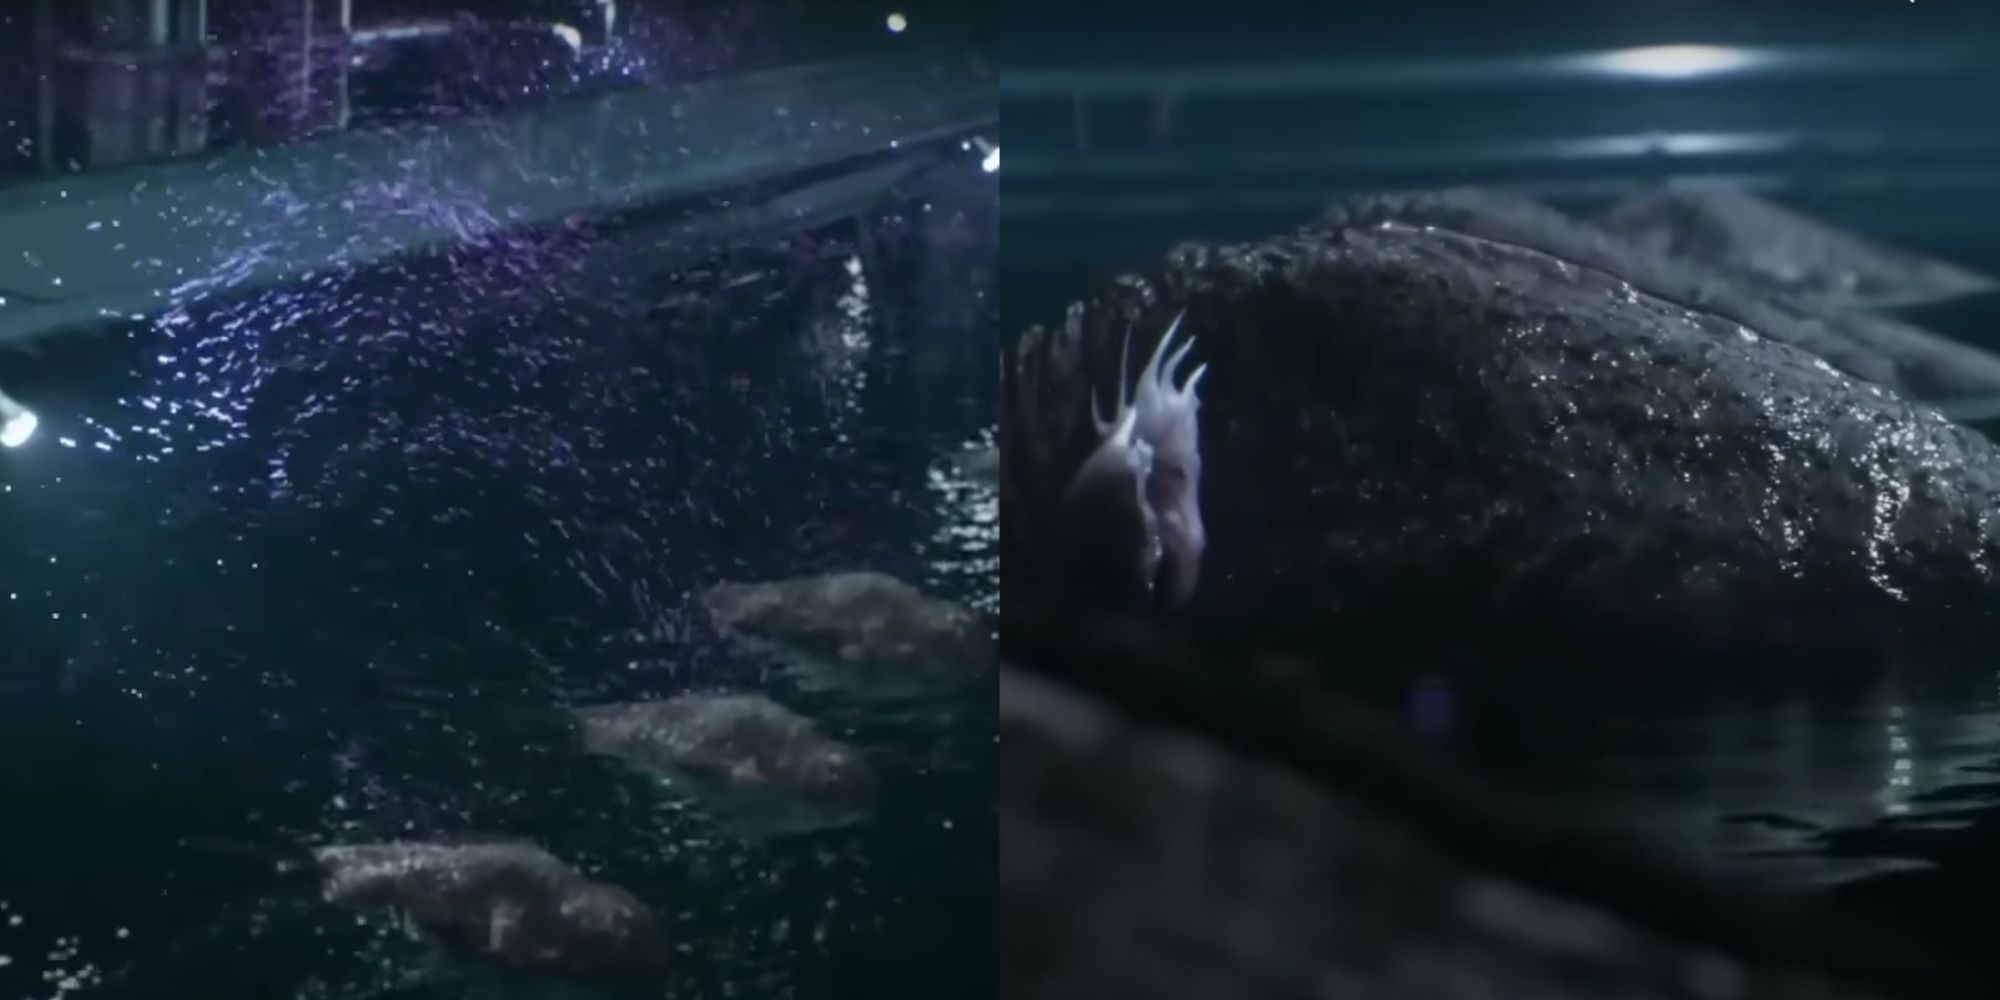 A split image of a zombie aquatic species that releases viral particles into the air and a close-up of its body with special gills.